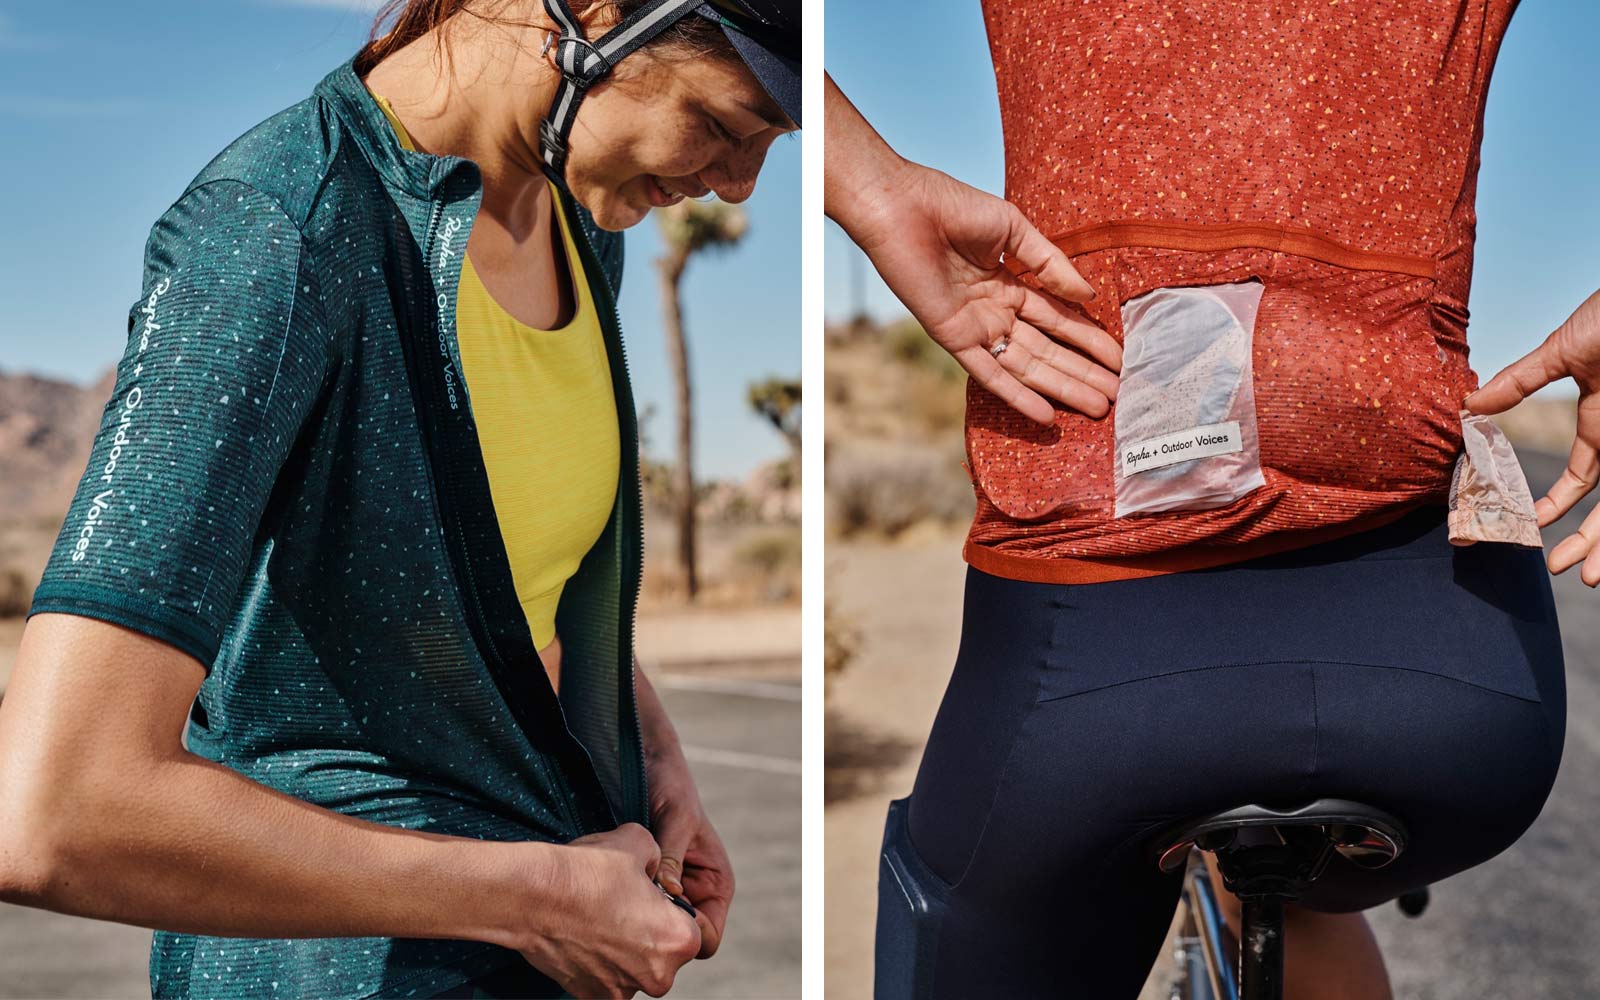 Rapha+Outdoor Voices women's cycling collection, casual performance riding kit clothing collaboration, photo by Cait Oppermann